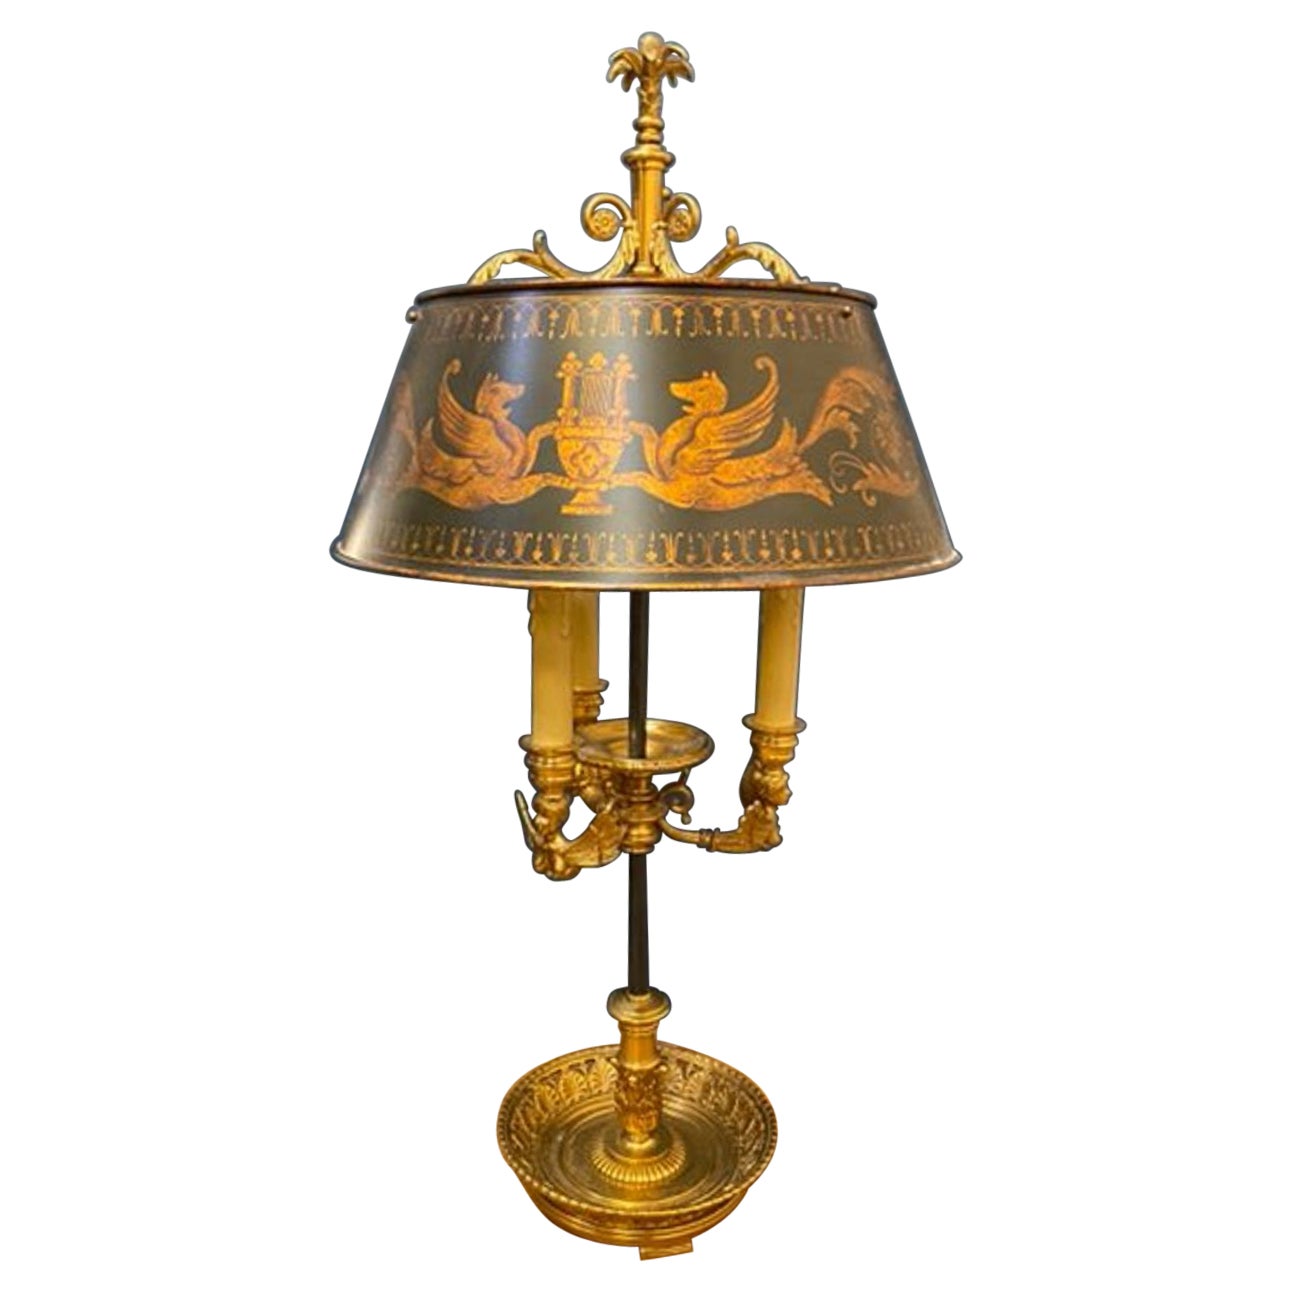 20th Century Empire Style Bouillette Lamp with Painted Tole Shade